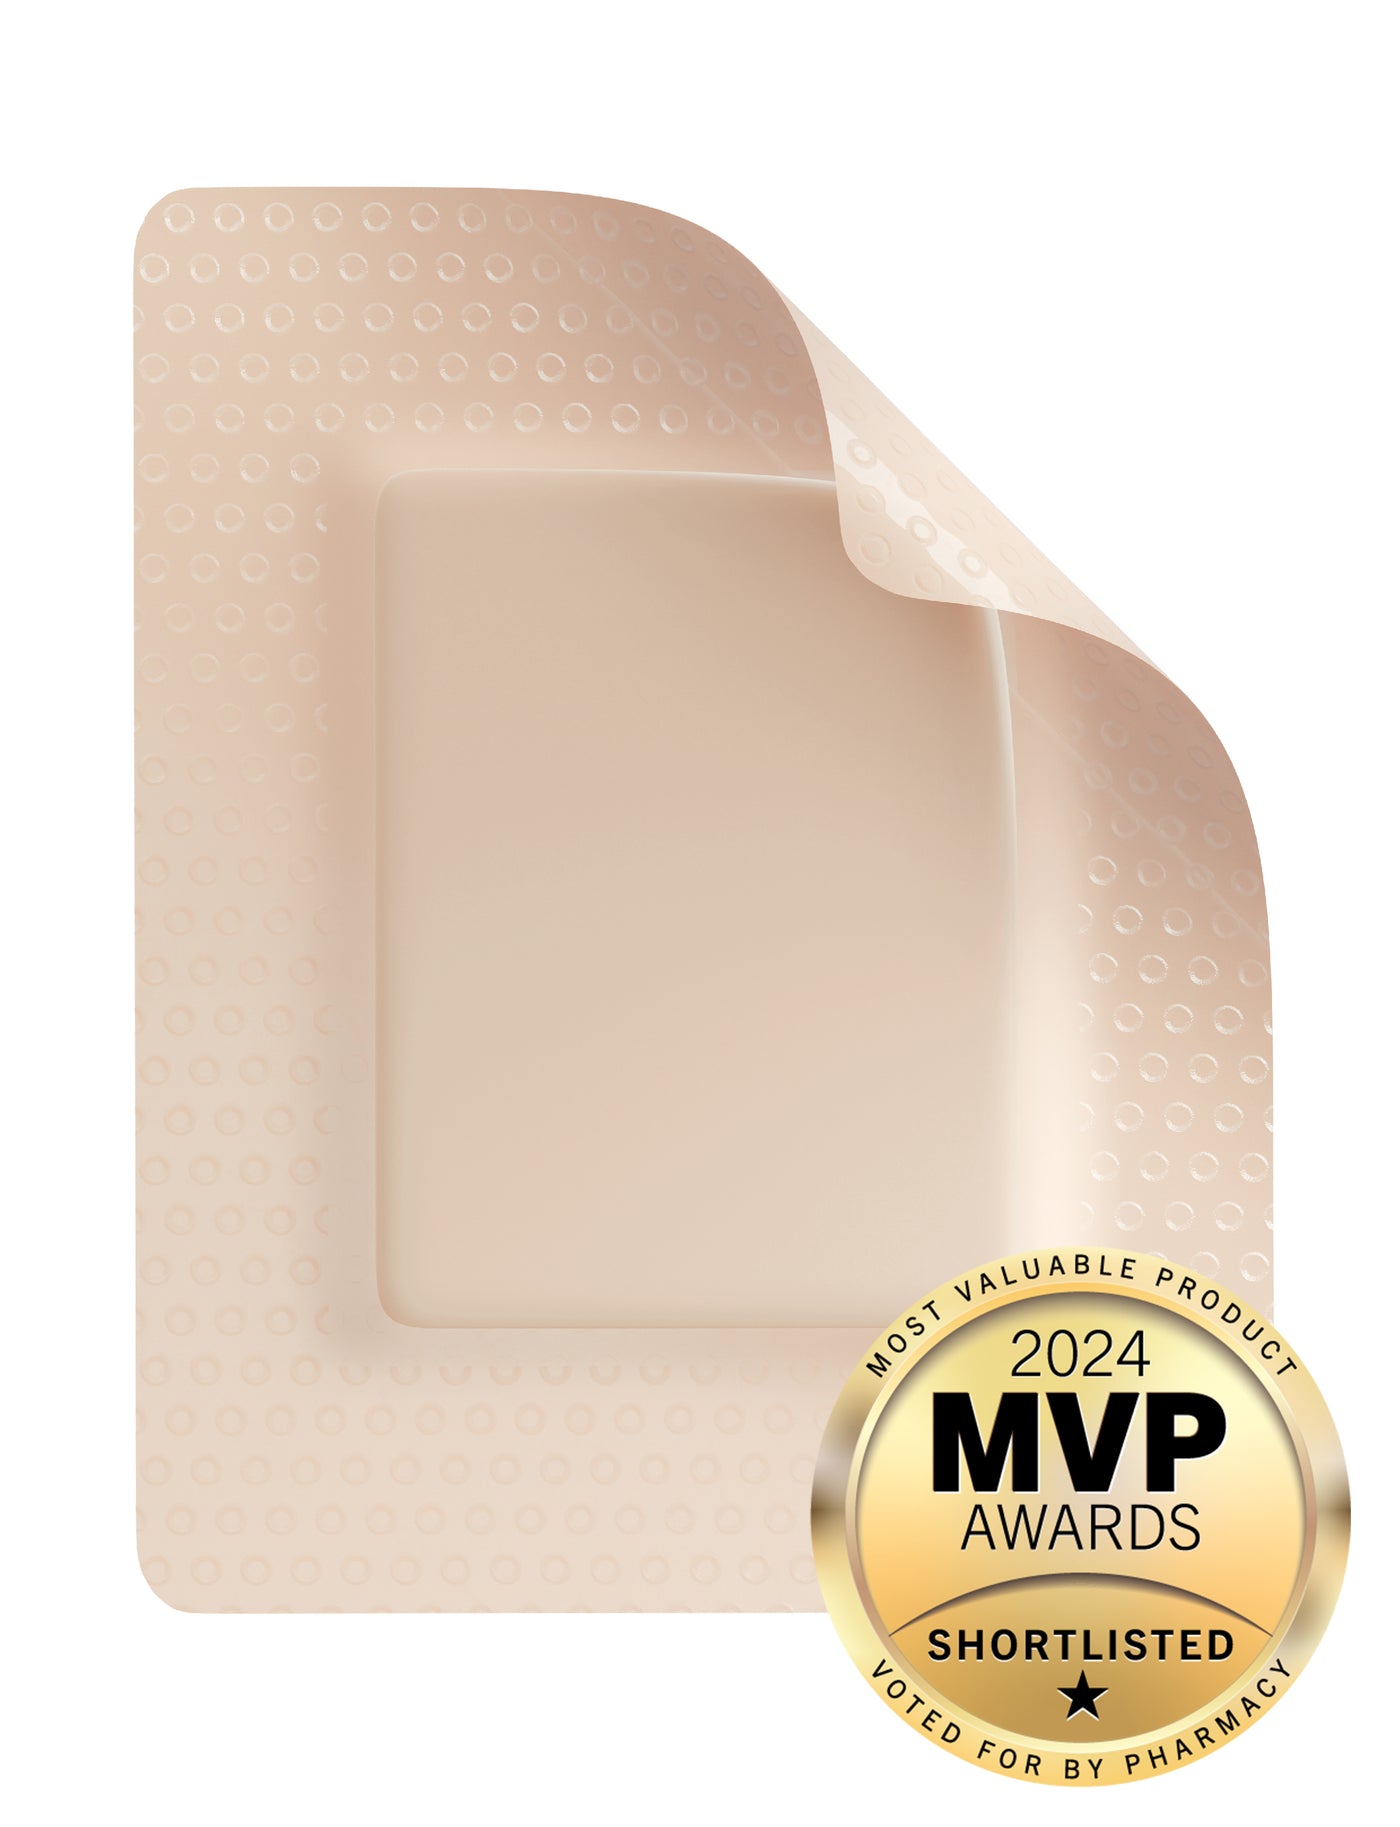 Neo G Silicone Foam Absorbent Dressing with 2024 MVP Awards Badge